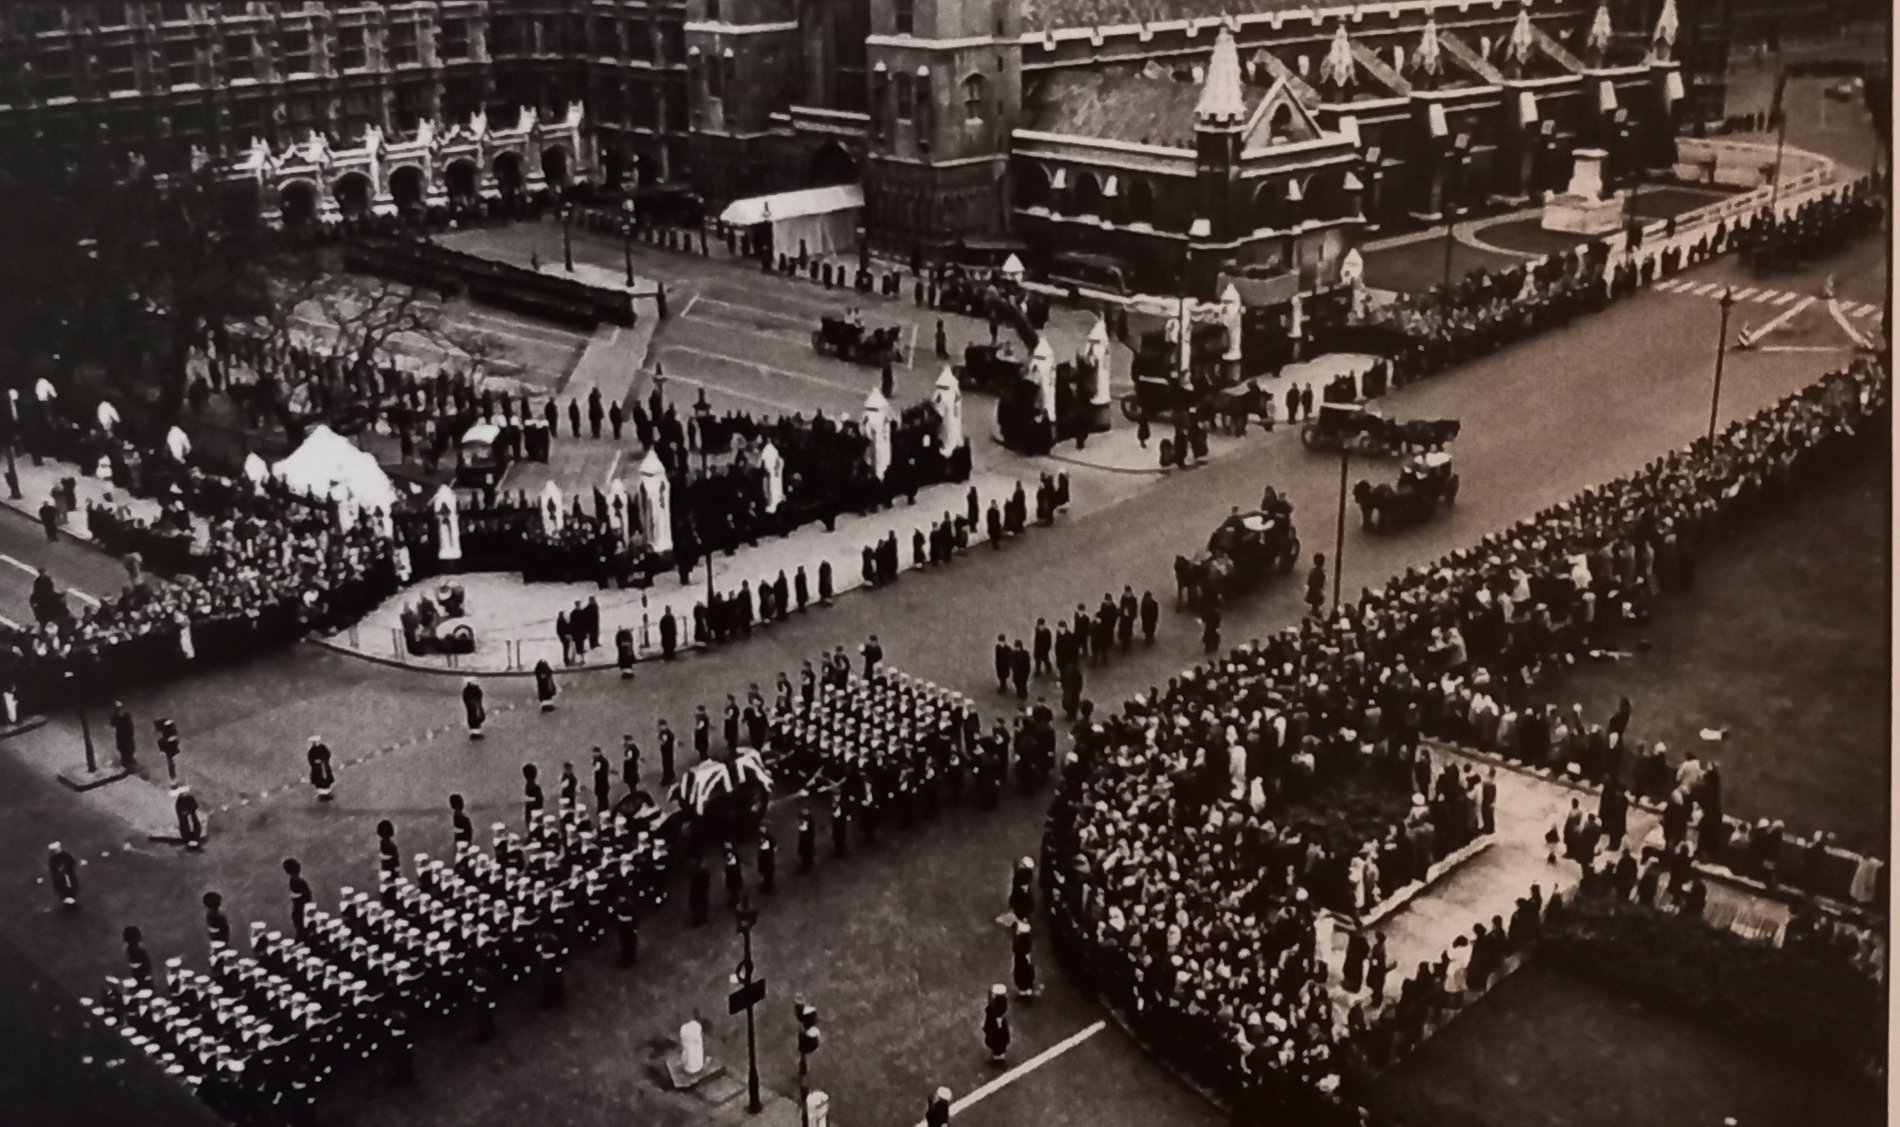 A photograph from Prime minister Winston Churchill's funeral, carried out by JH Kenyon Funeral Directors